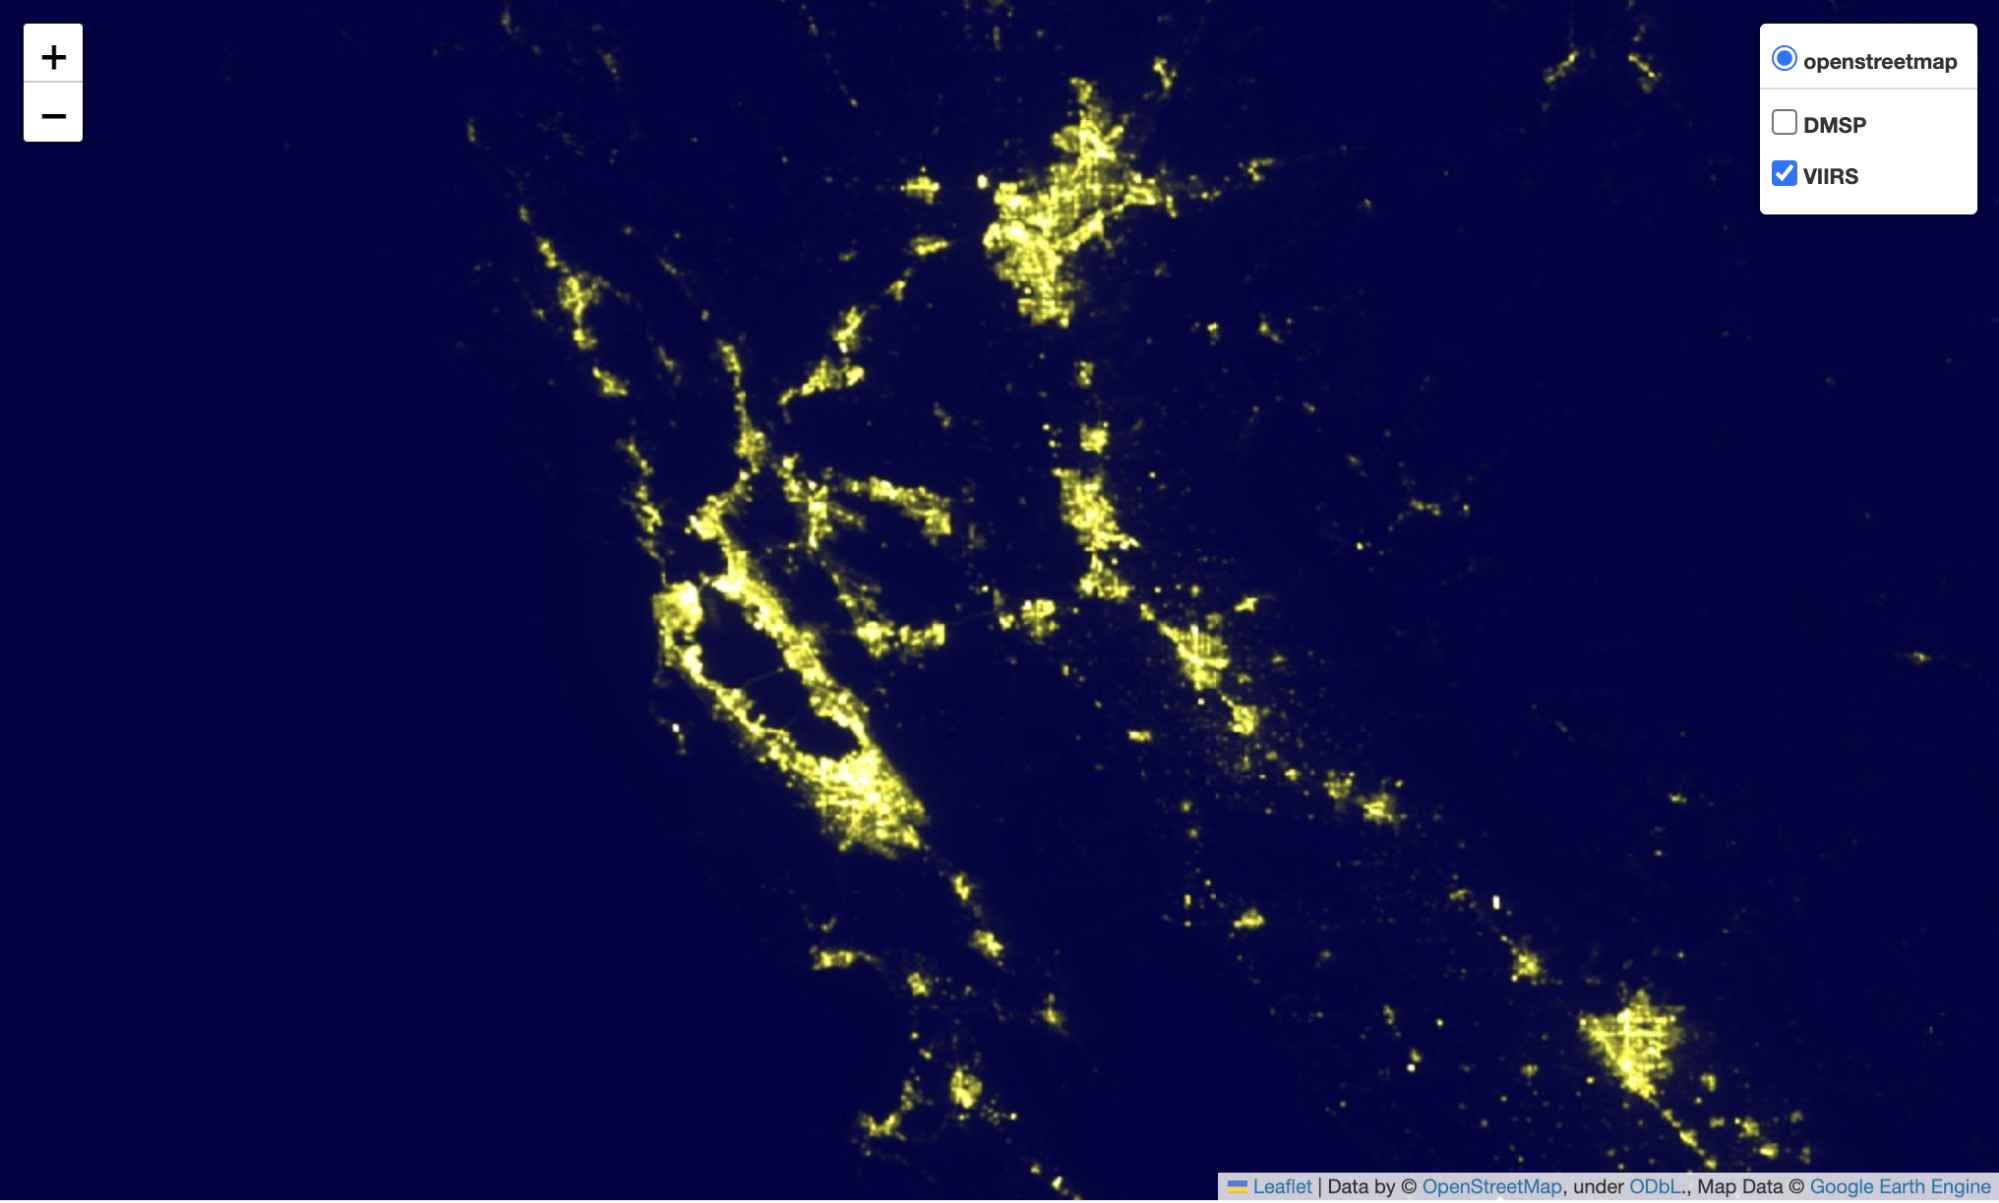 overlap the mean values of the whole nighttime light datasets on top of the global OpenStreetMap